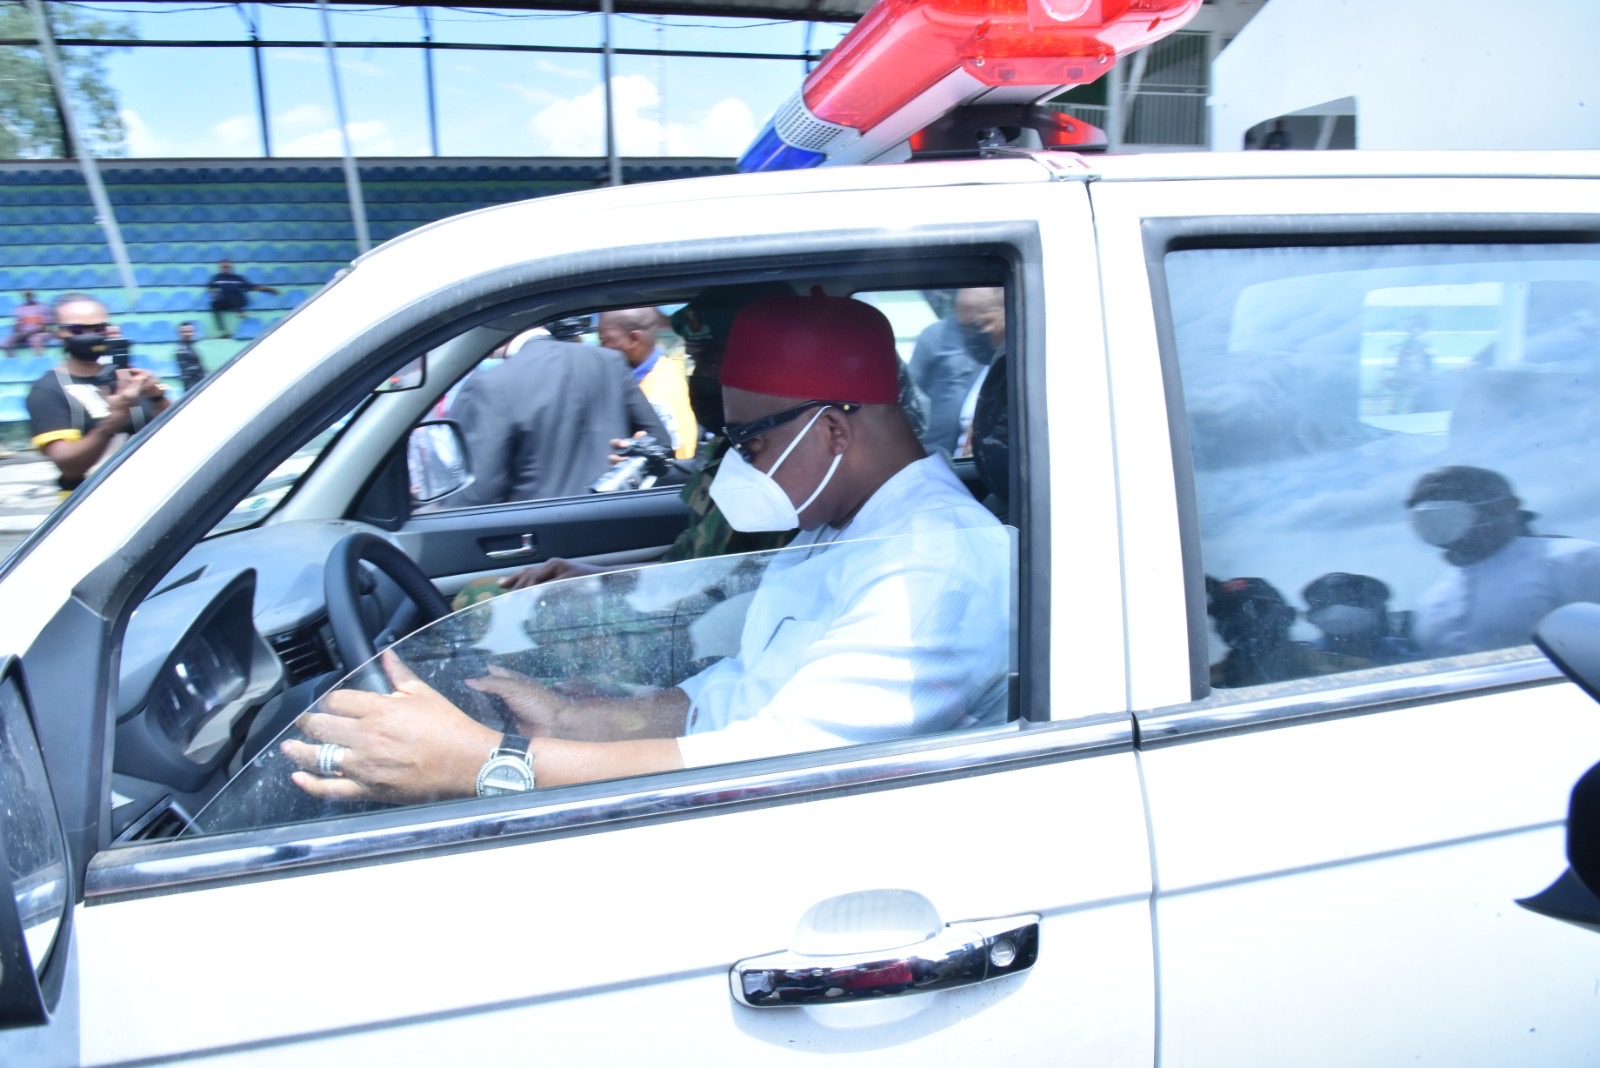 Crime Fighting: Uzodinma Presents 100 Patrol Vehicles Fitted With Gadgets To Security Agencies